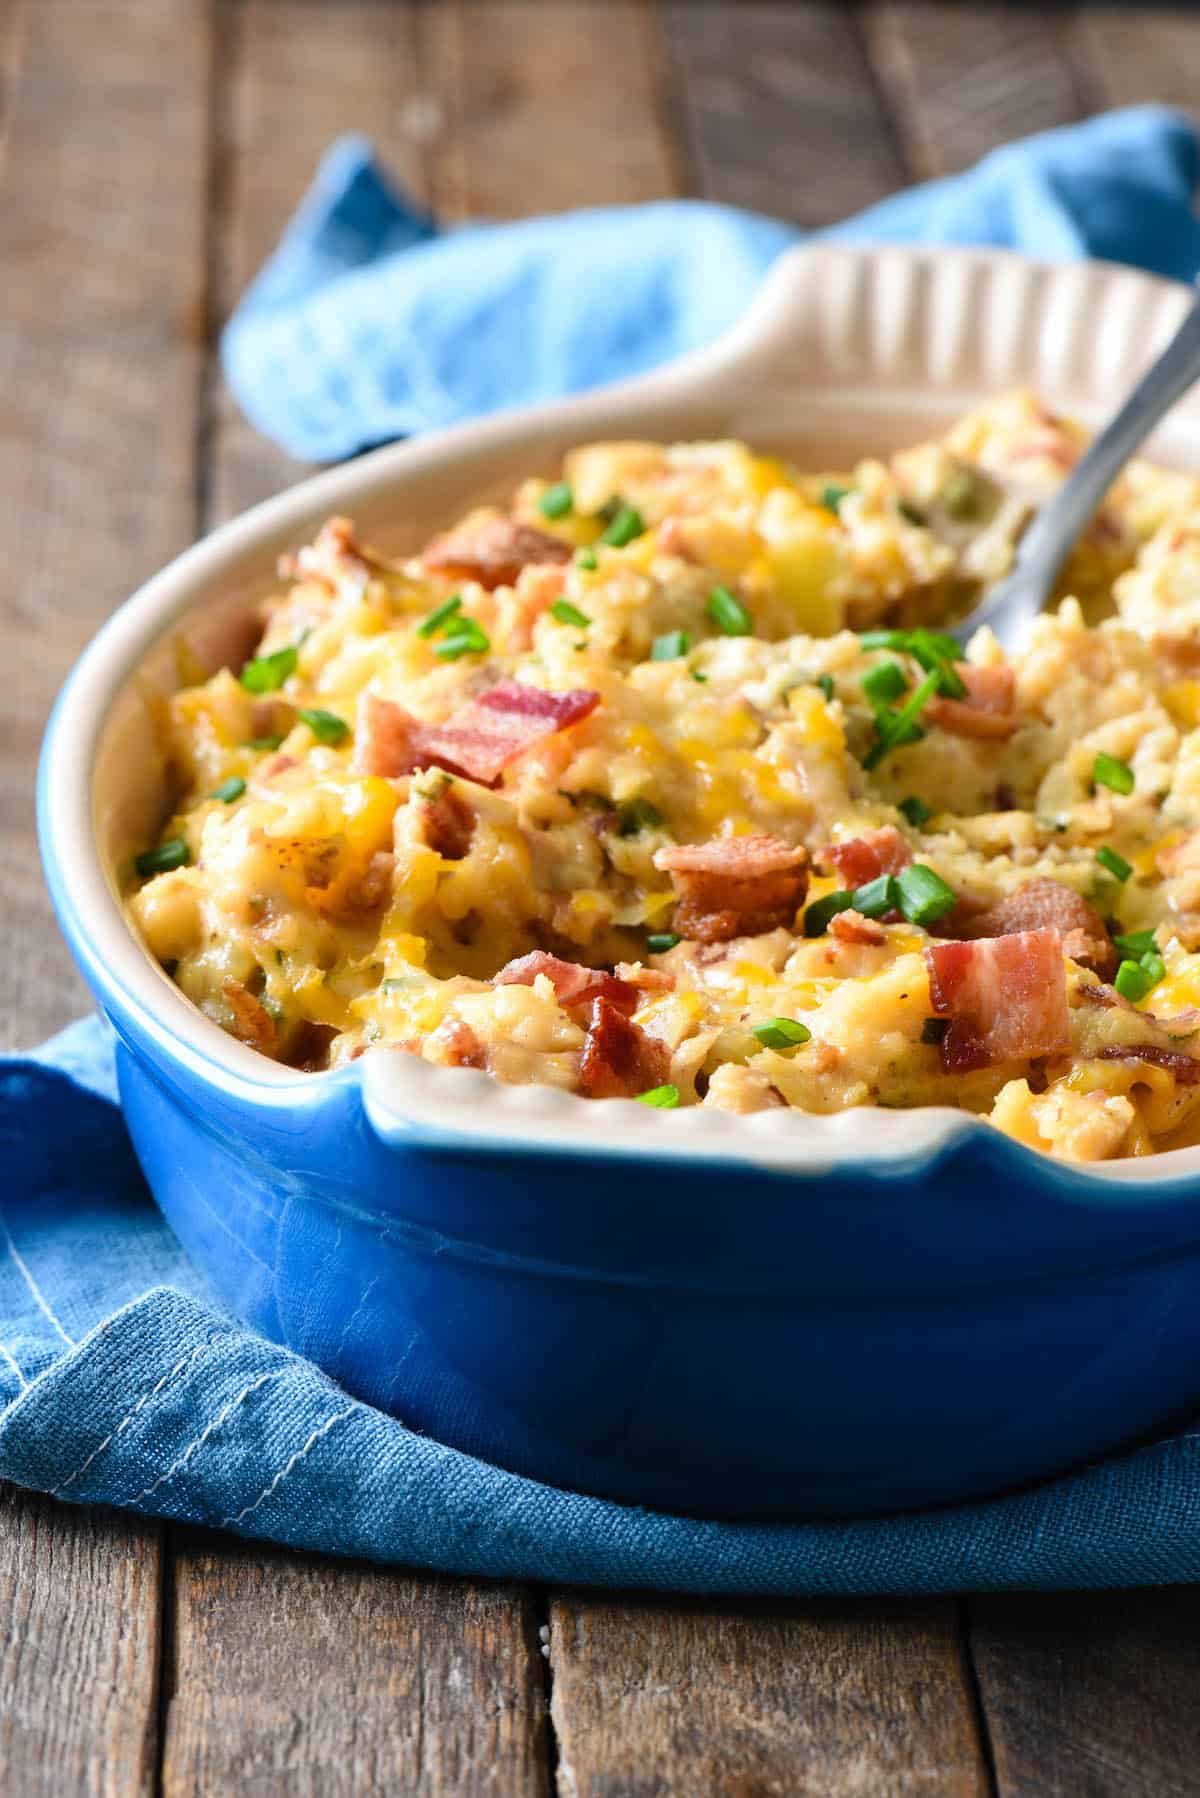 Mashed potato casserole with bacon and green onions, in oval blue baking dish.